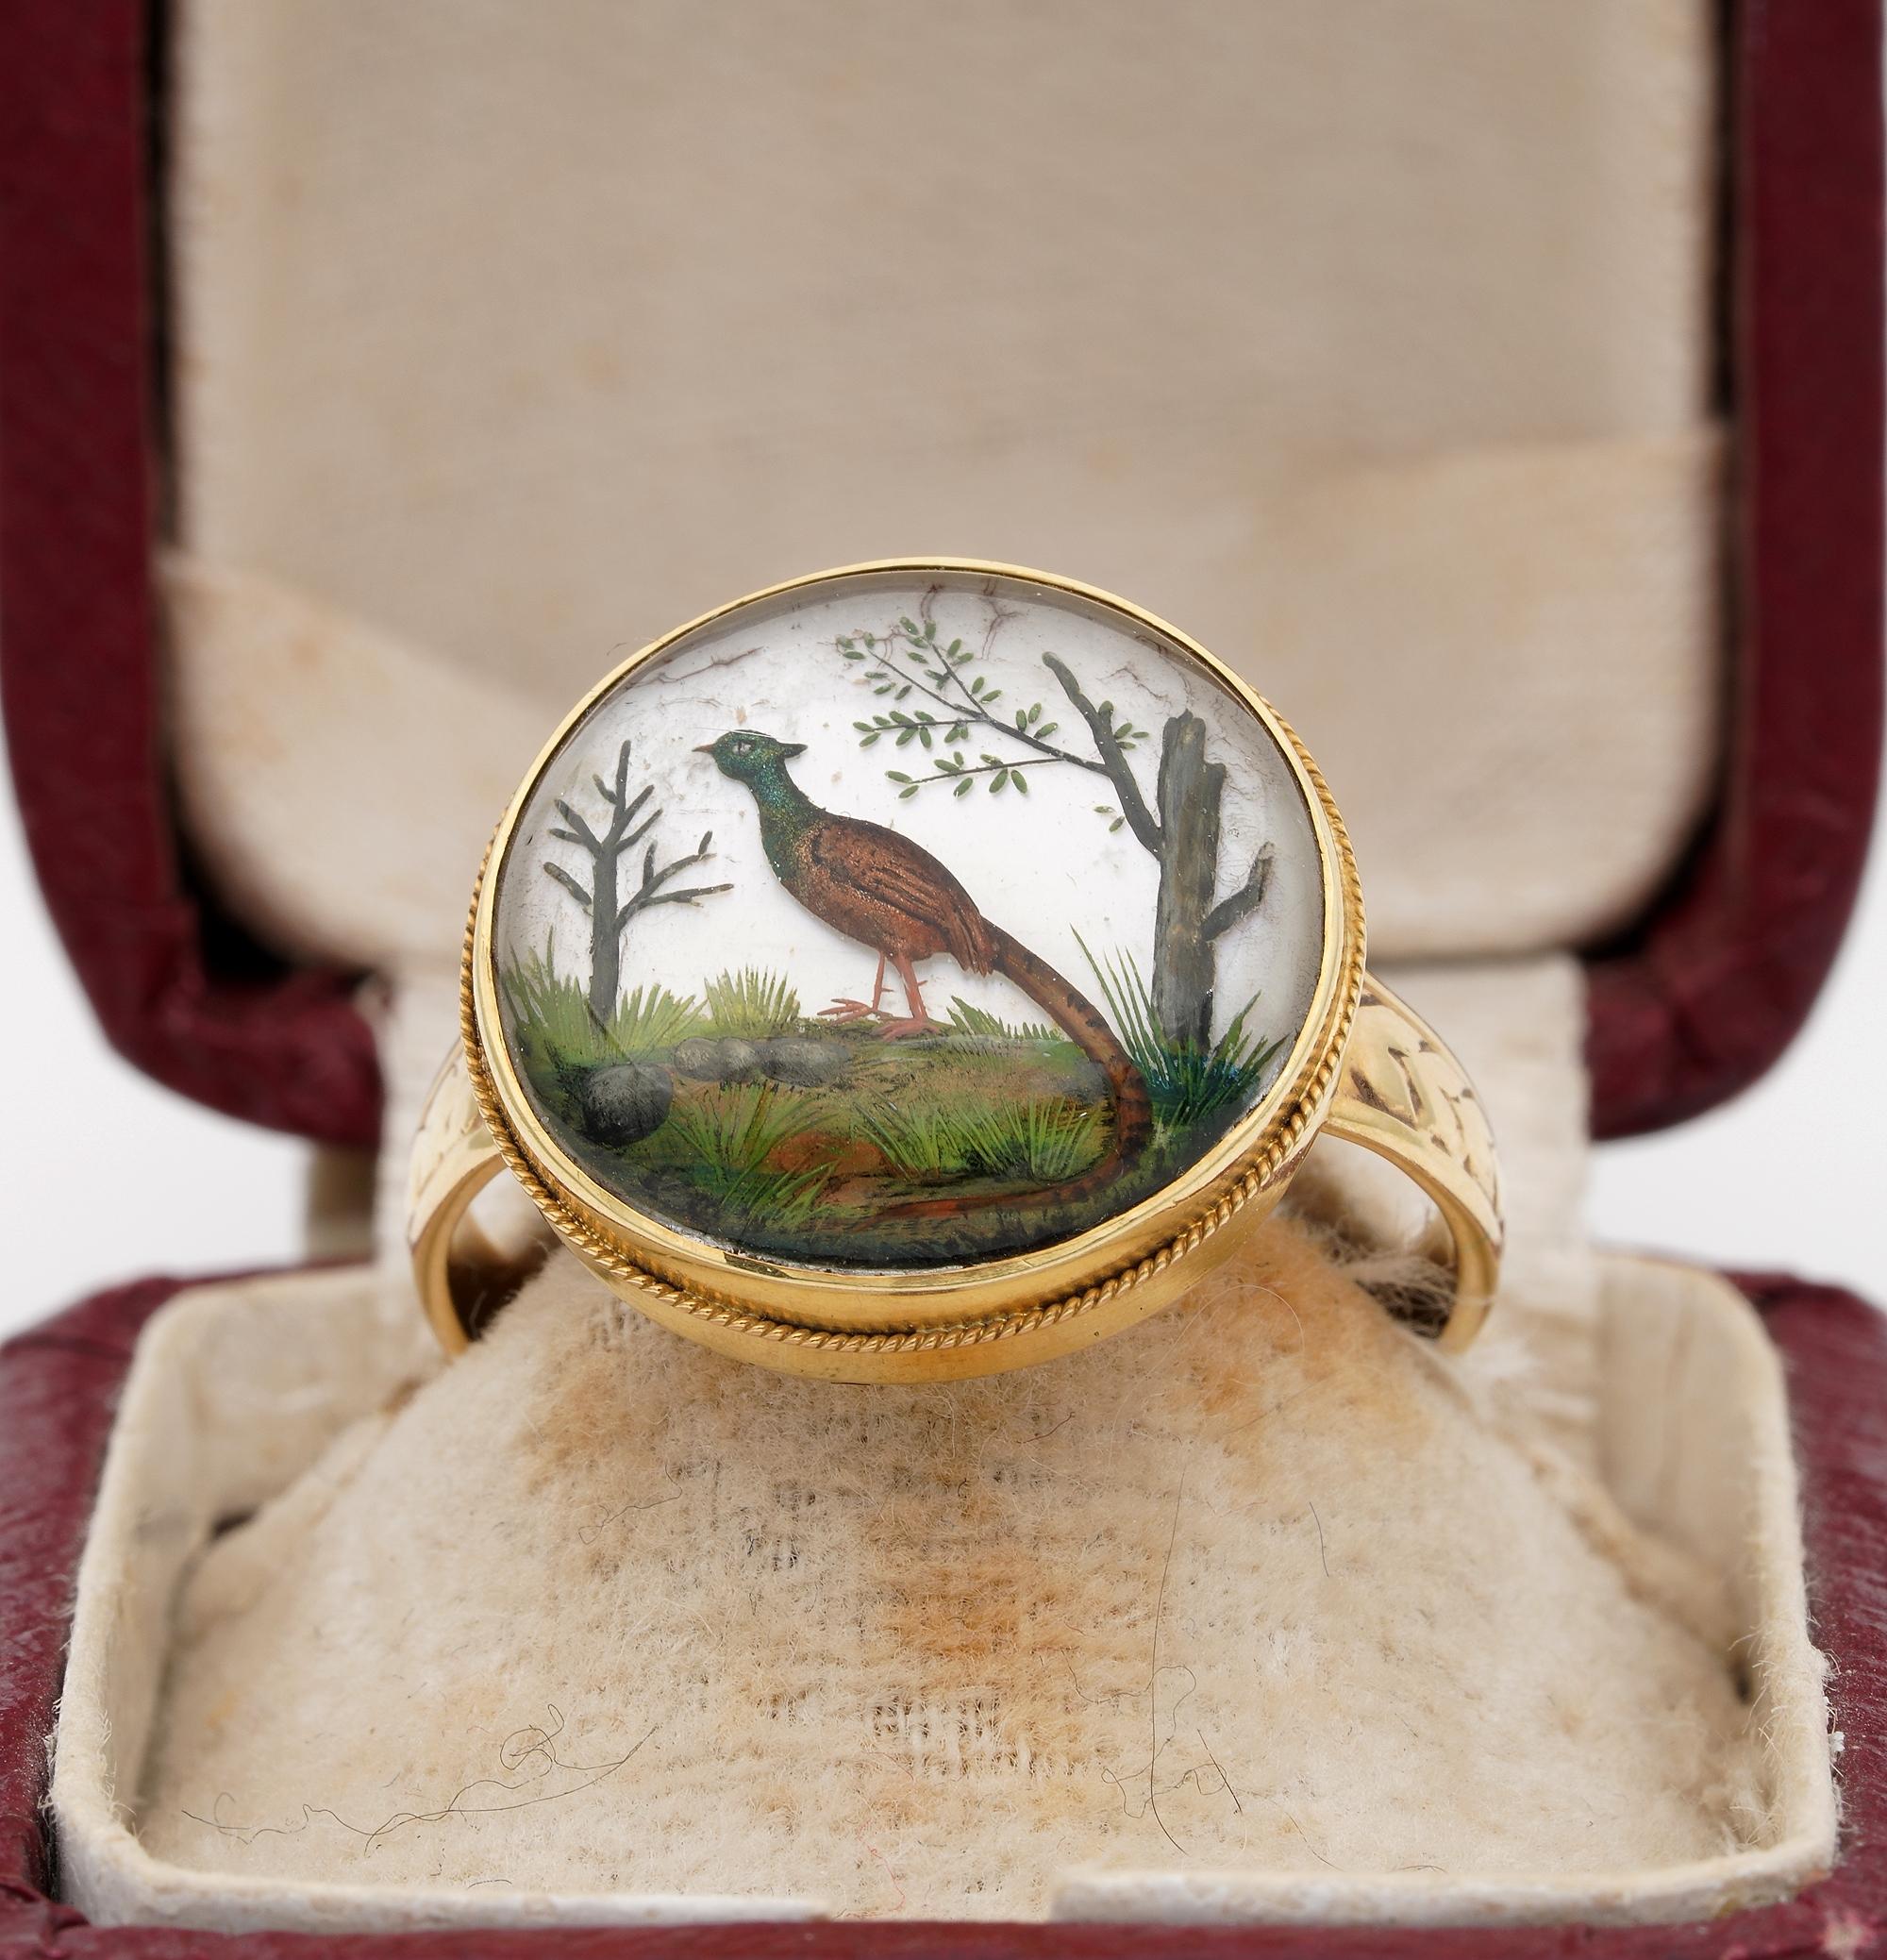 Past Sights
Beautiful example of Victorian period Essex Crystal reverse intaglio ring depicting birds into natural scene like a window on Eden garden, beautiful carving highly detailed and painted, artistic past technique giving the subject trompe